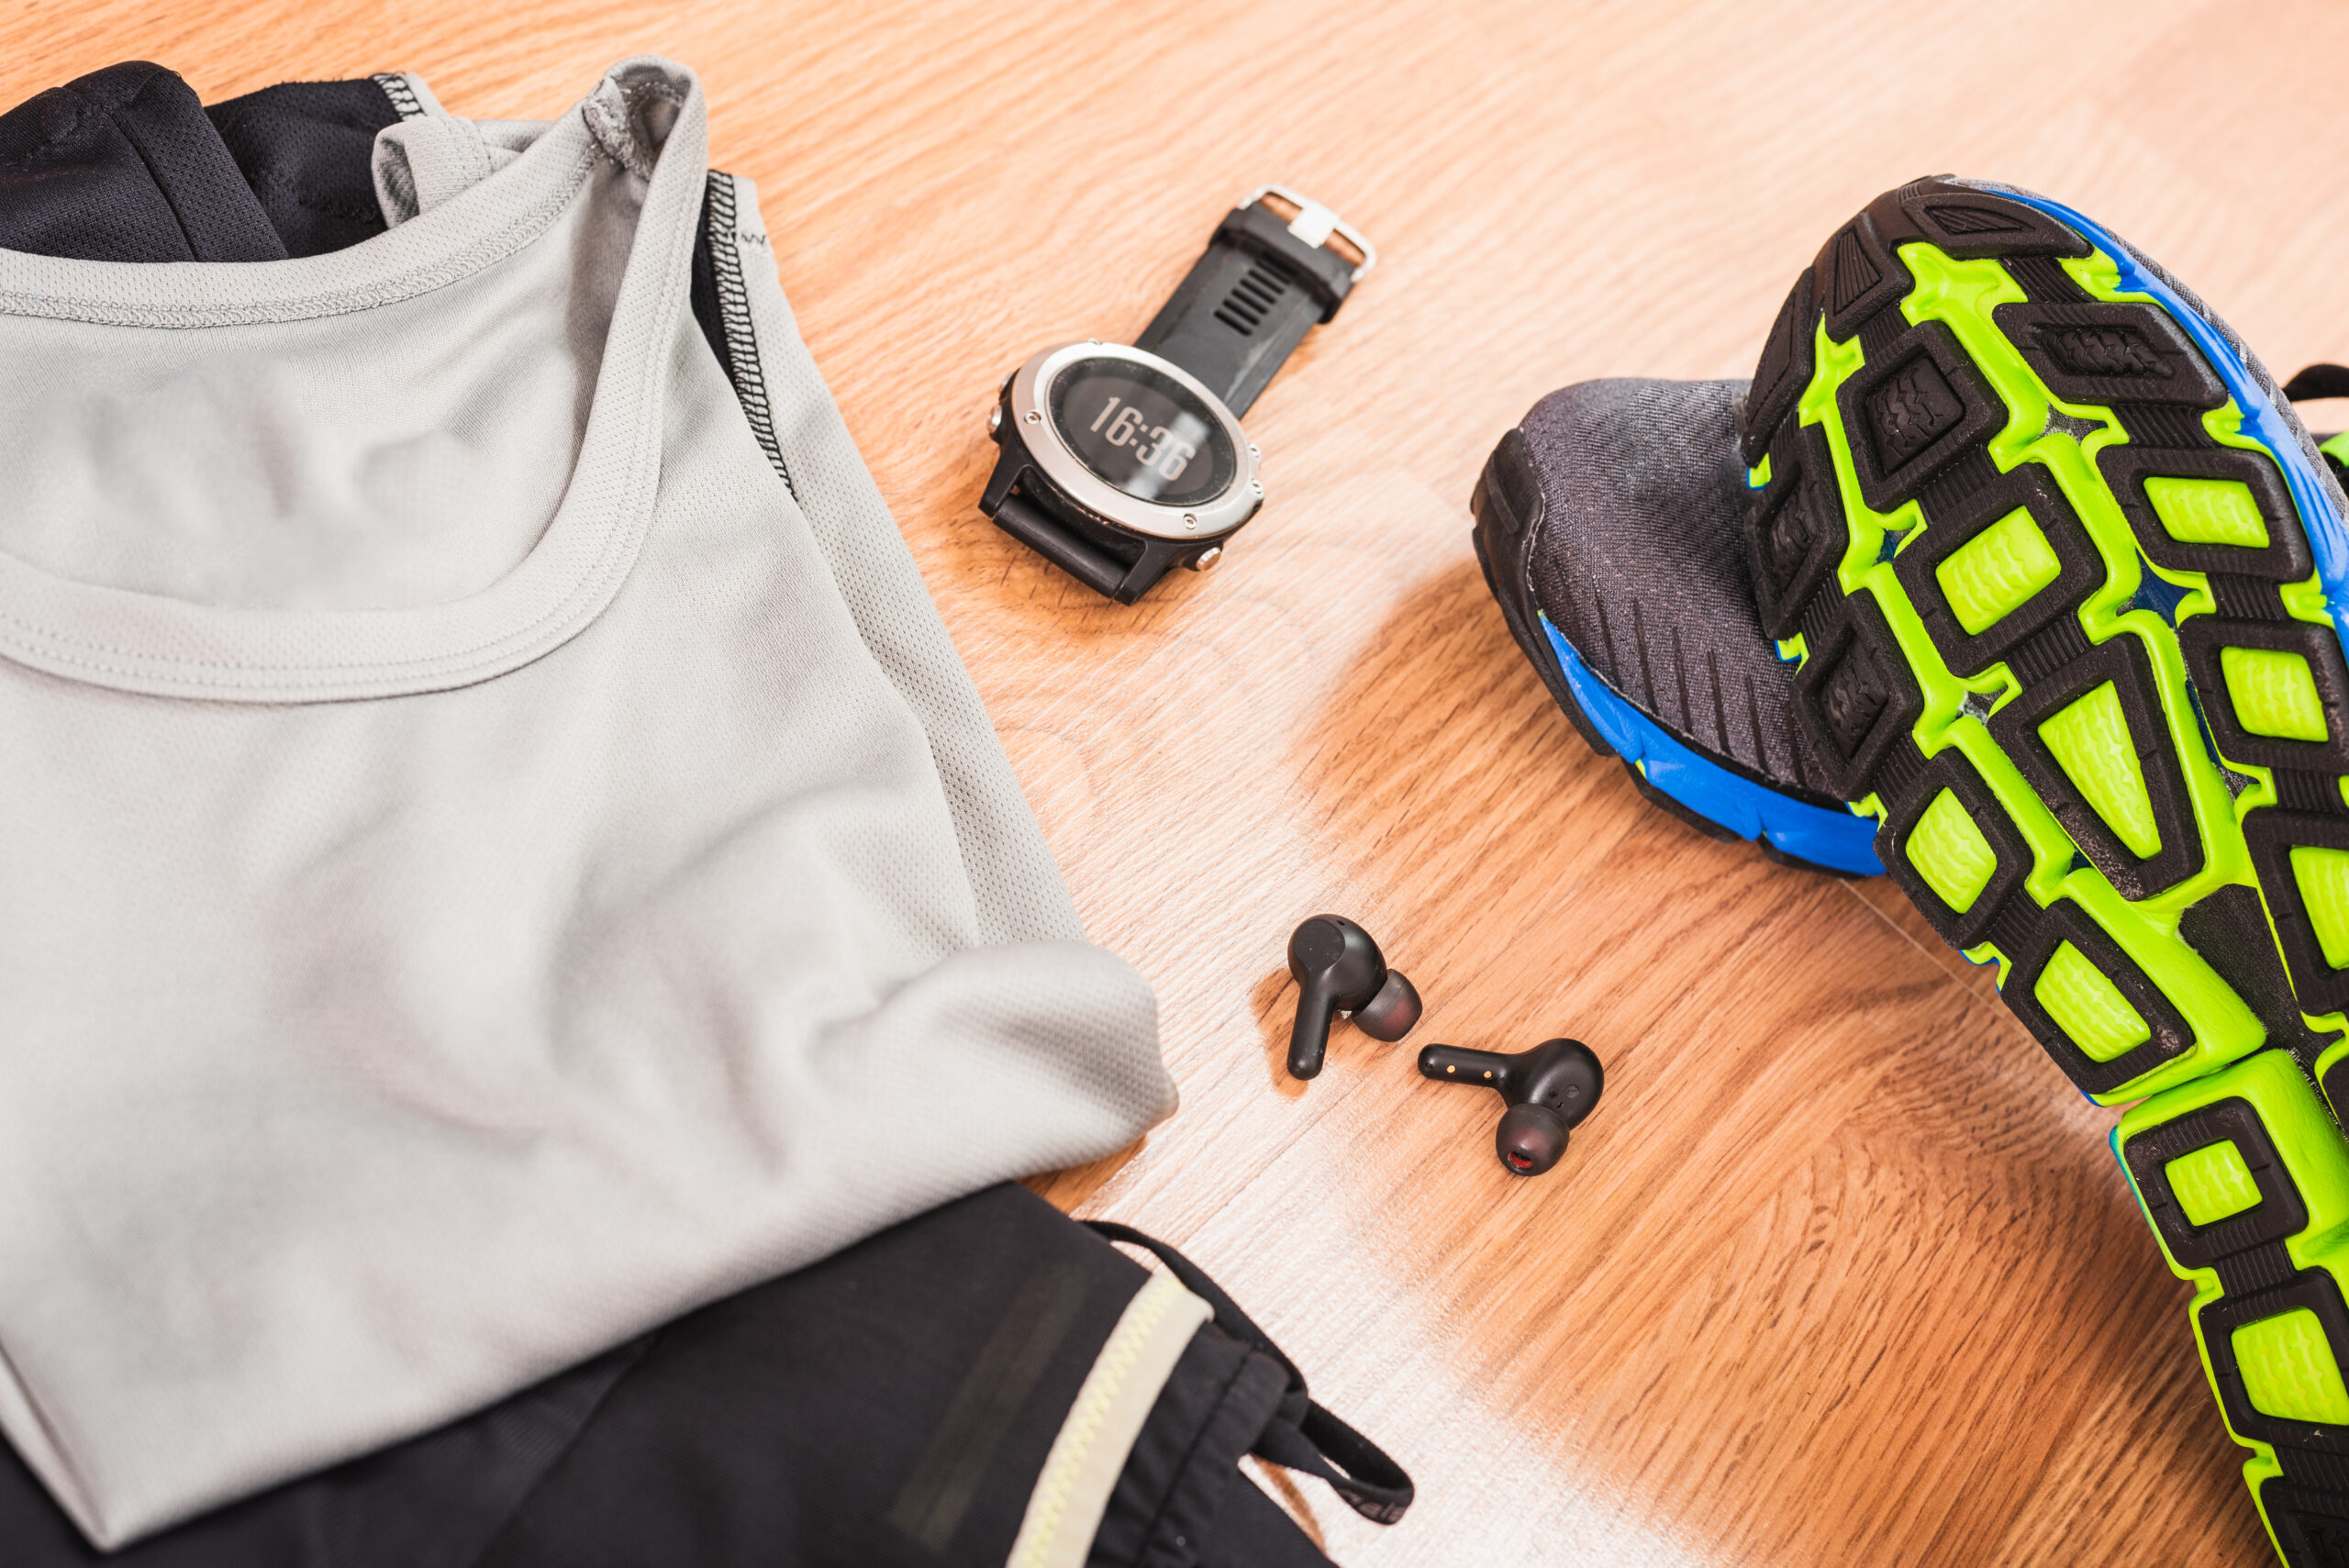 Athletic running apparel: Clothes, Watch, Air Pods & Shoes